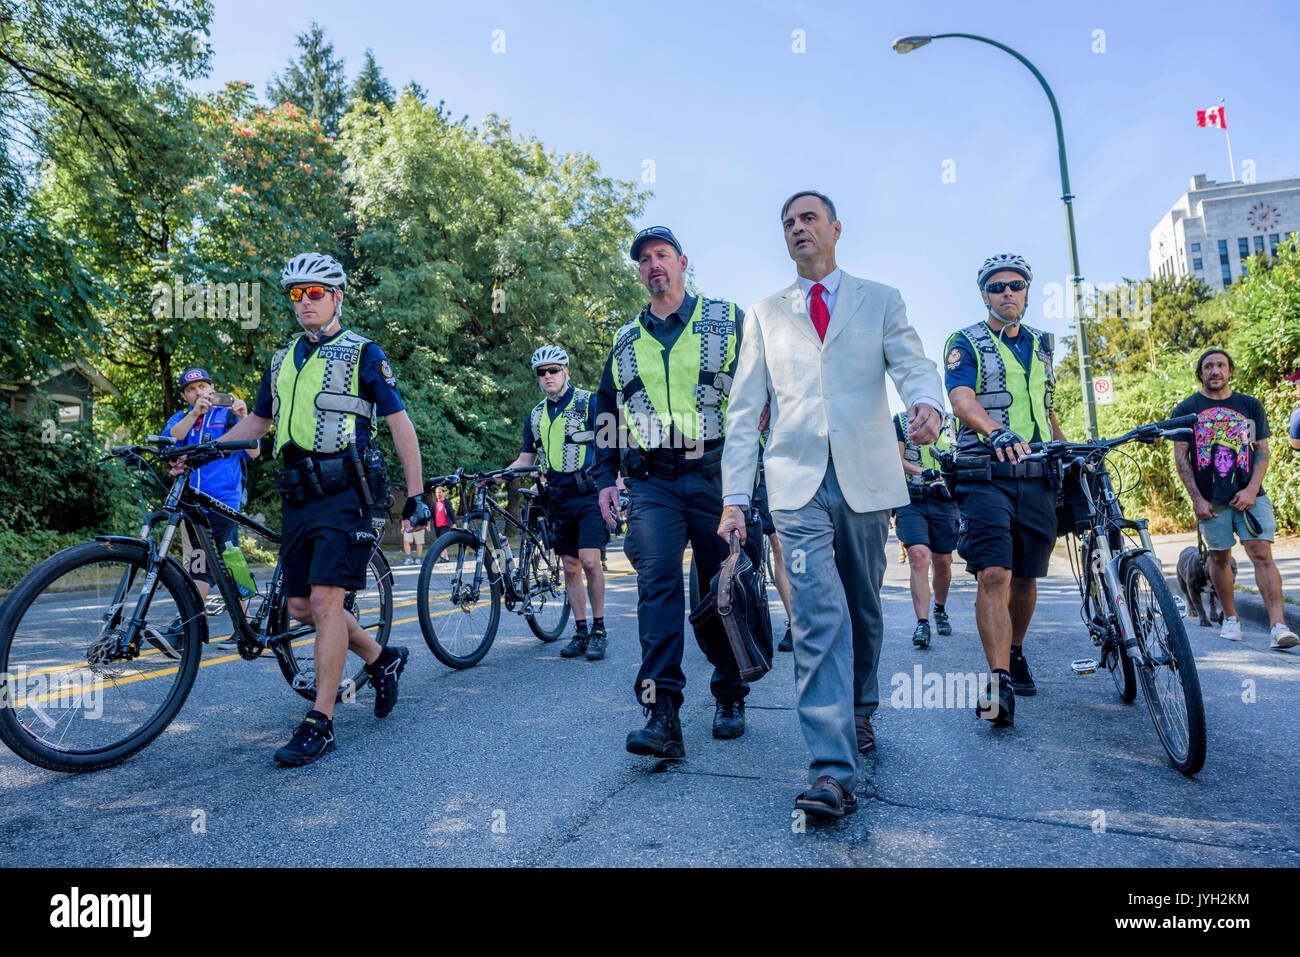 Vancouver, Canada. 19th Aug, 2017. Self professed nazi needs police protection at Anti-Racism rally, City Hall, Vancouver, British Columbia, Canada. Credit: Michael Wheatley/Alamy Live News Stock Photo